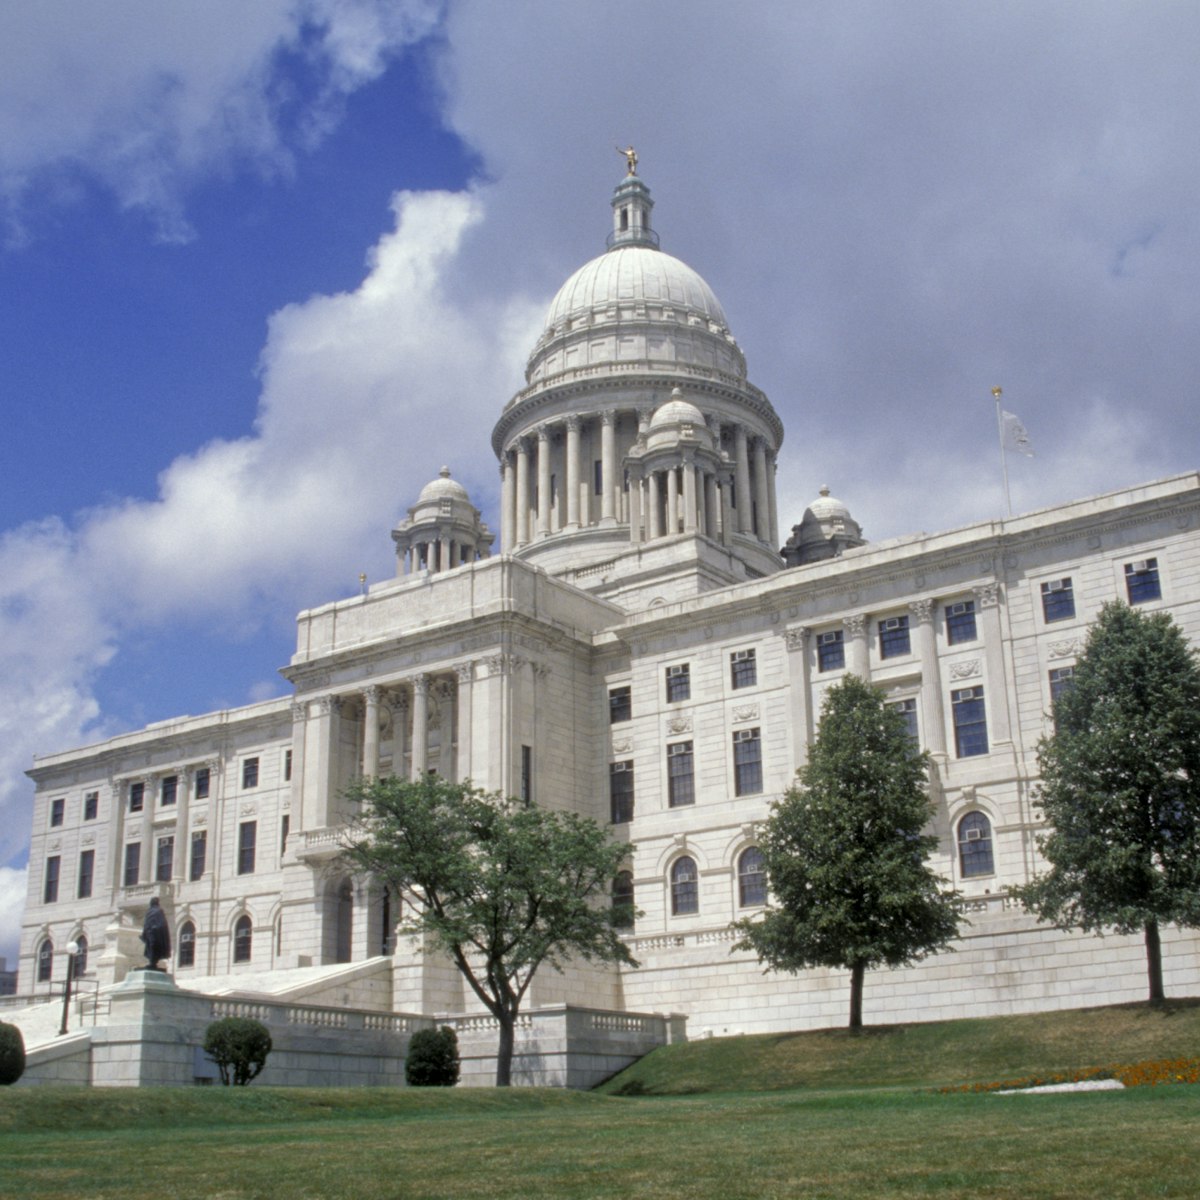 Rhode Island, Providence, State House, State Capitol. (Photo by Education Images/UIG via Getty Images)